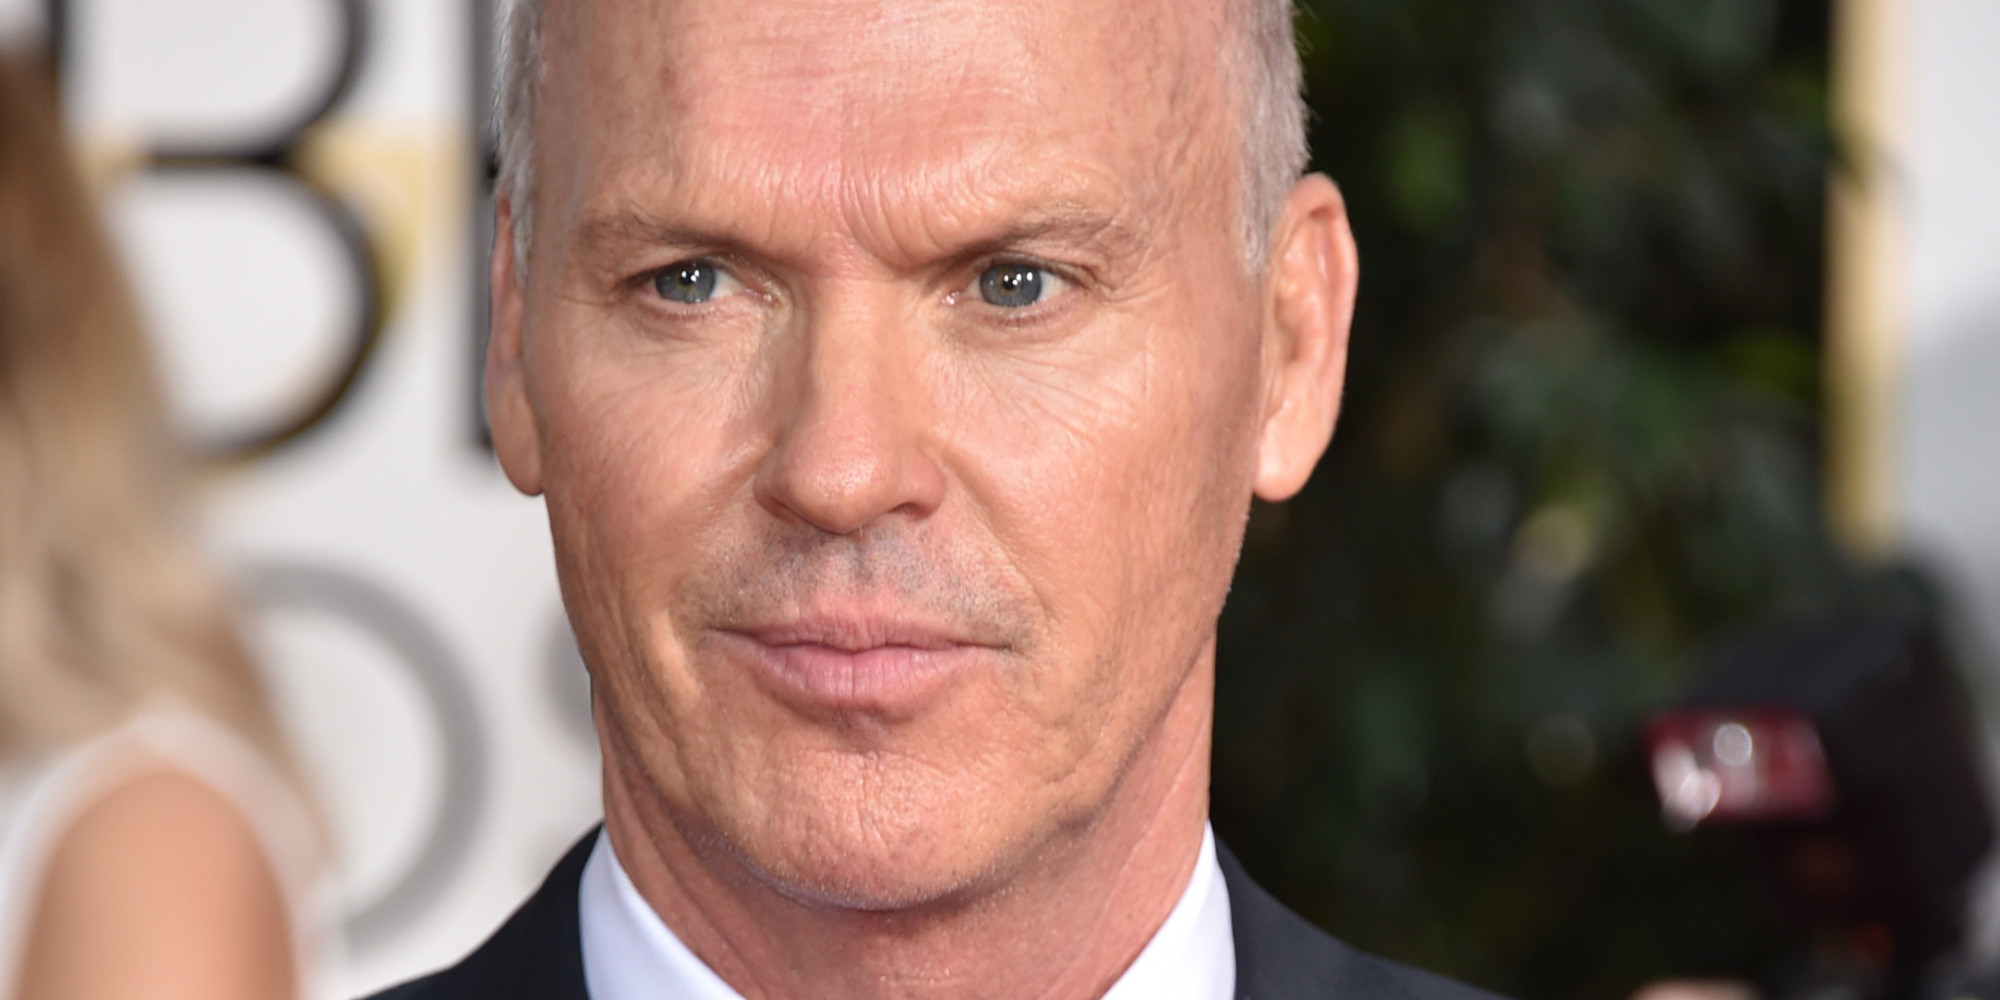 Michael Keaton arrives at the 72nd annual Golden Globe Awards at the Beverly Hilton Hotel on Sunday, Jan. 11, 2015, in Beverly Hills, Calif. (Photo by John Shearer/Invision/AP)